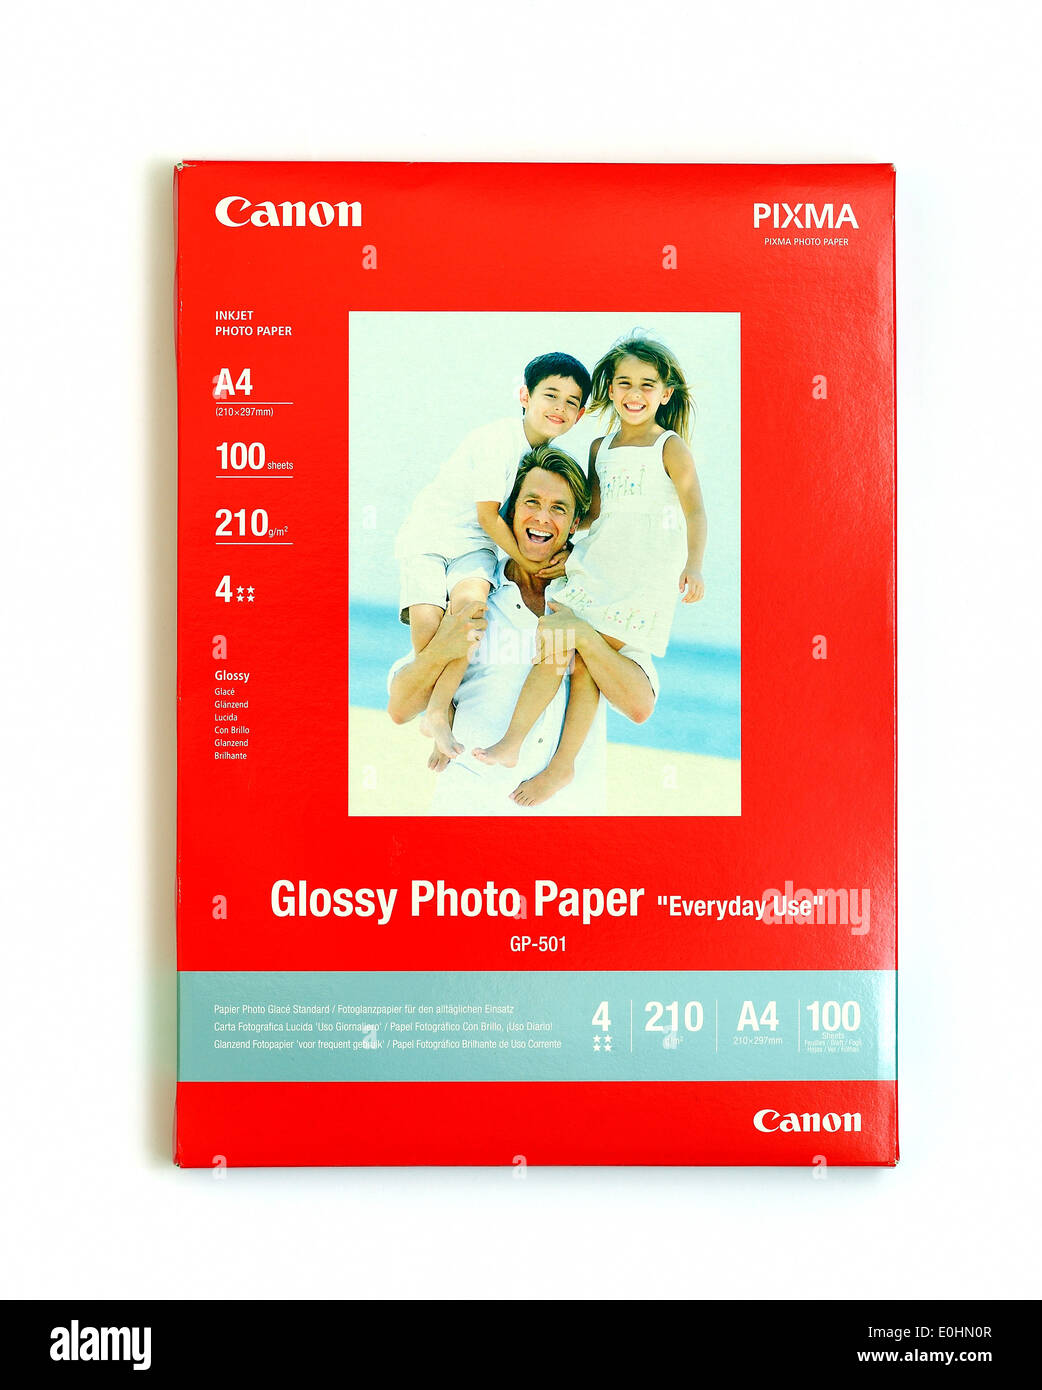 Pack of canon photo printing paper A4 size 210g in weight Stock Photo